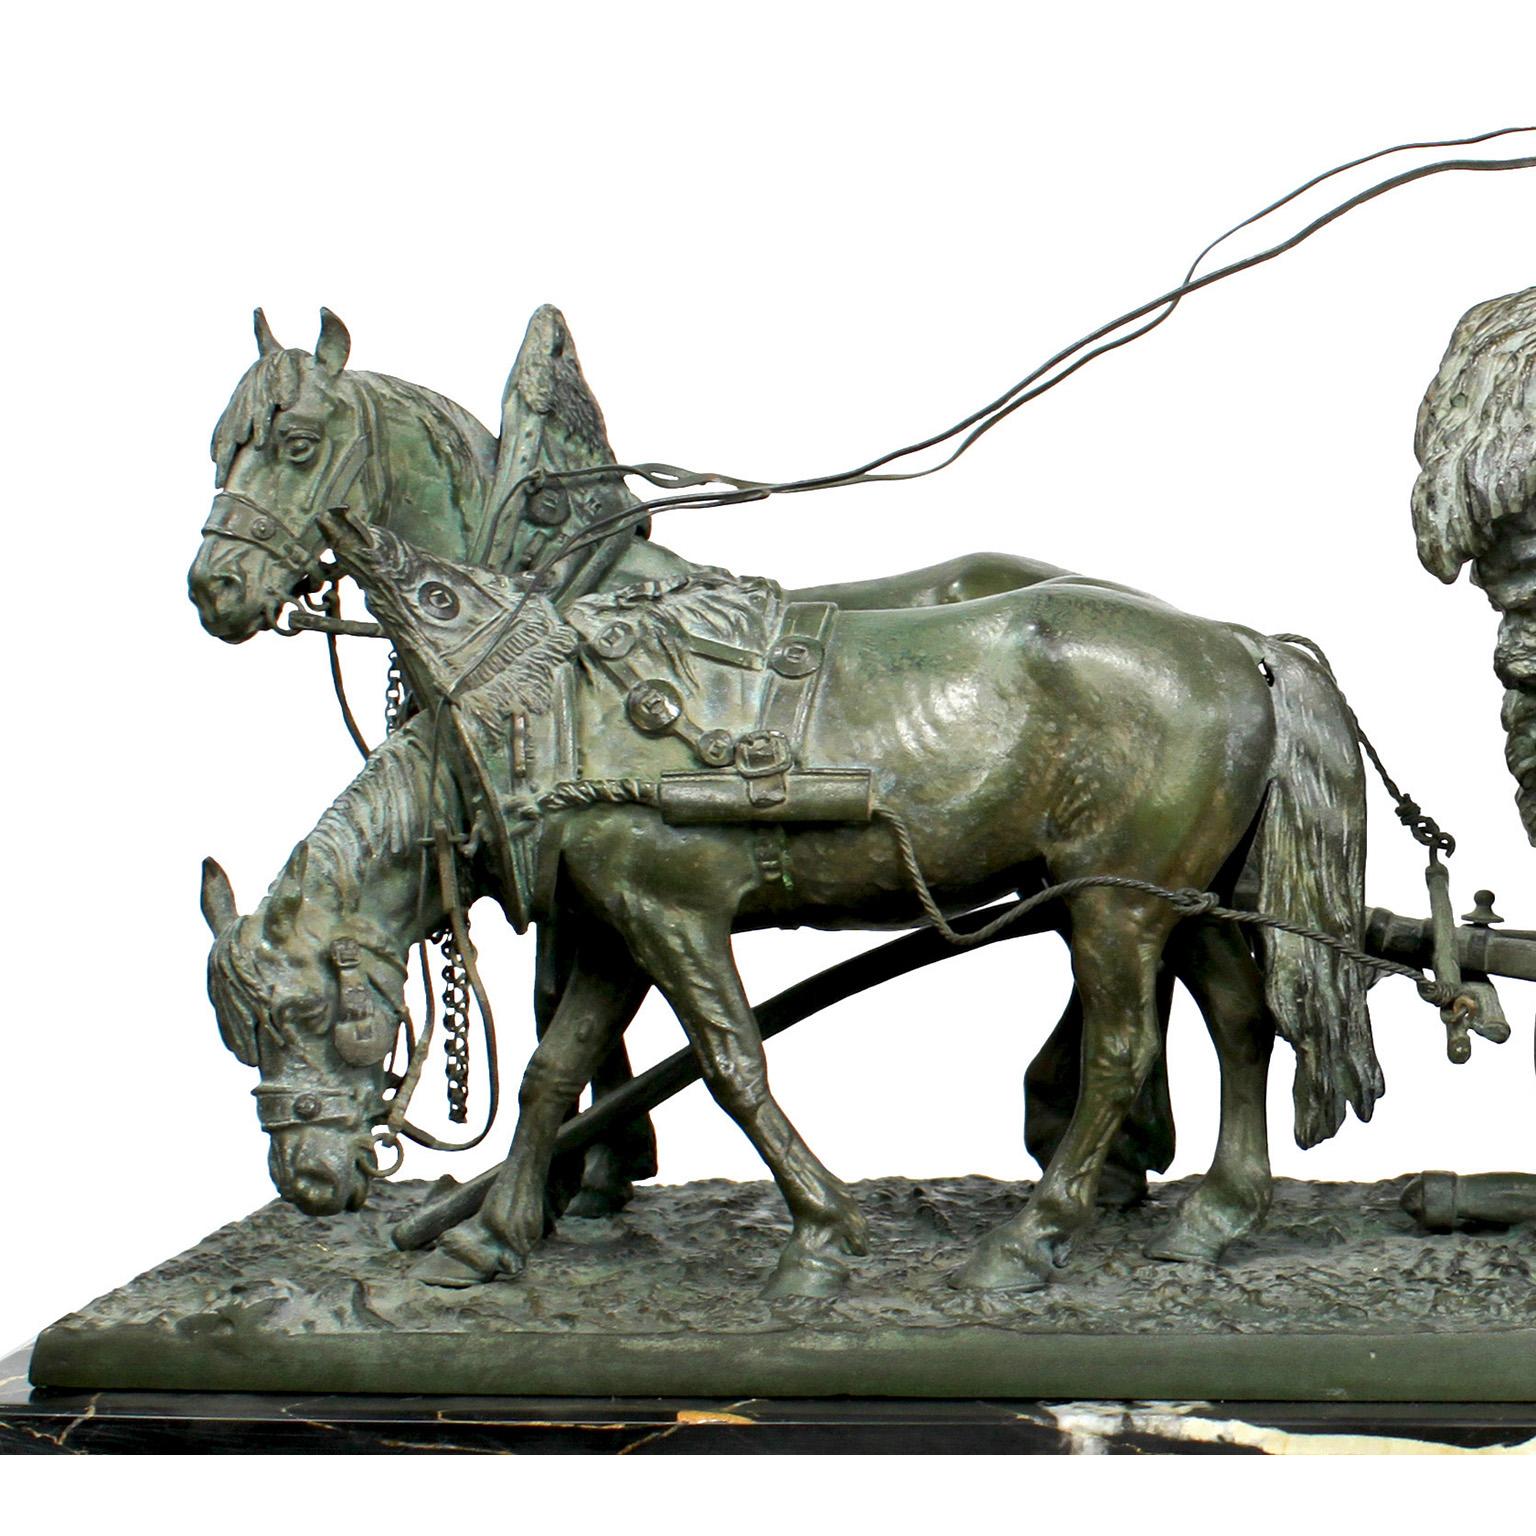 After Rudolf Winder (Austrian, b. 1842) a very fine Austrian 19th century figural group depicting farmers loading a horse-drawn-cart with their wheat harvest. The finely cast green-patinated bronze sculpture of a twin-drawn horse cart, with the male